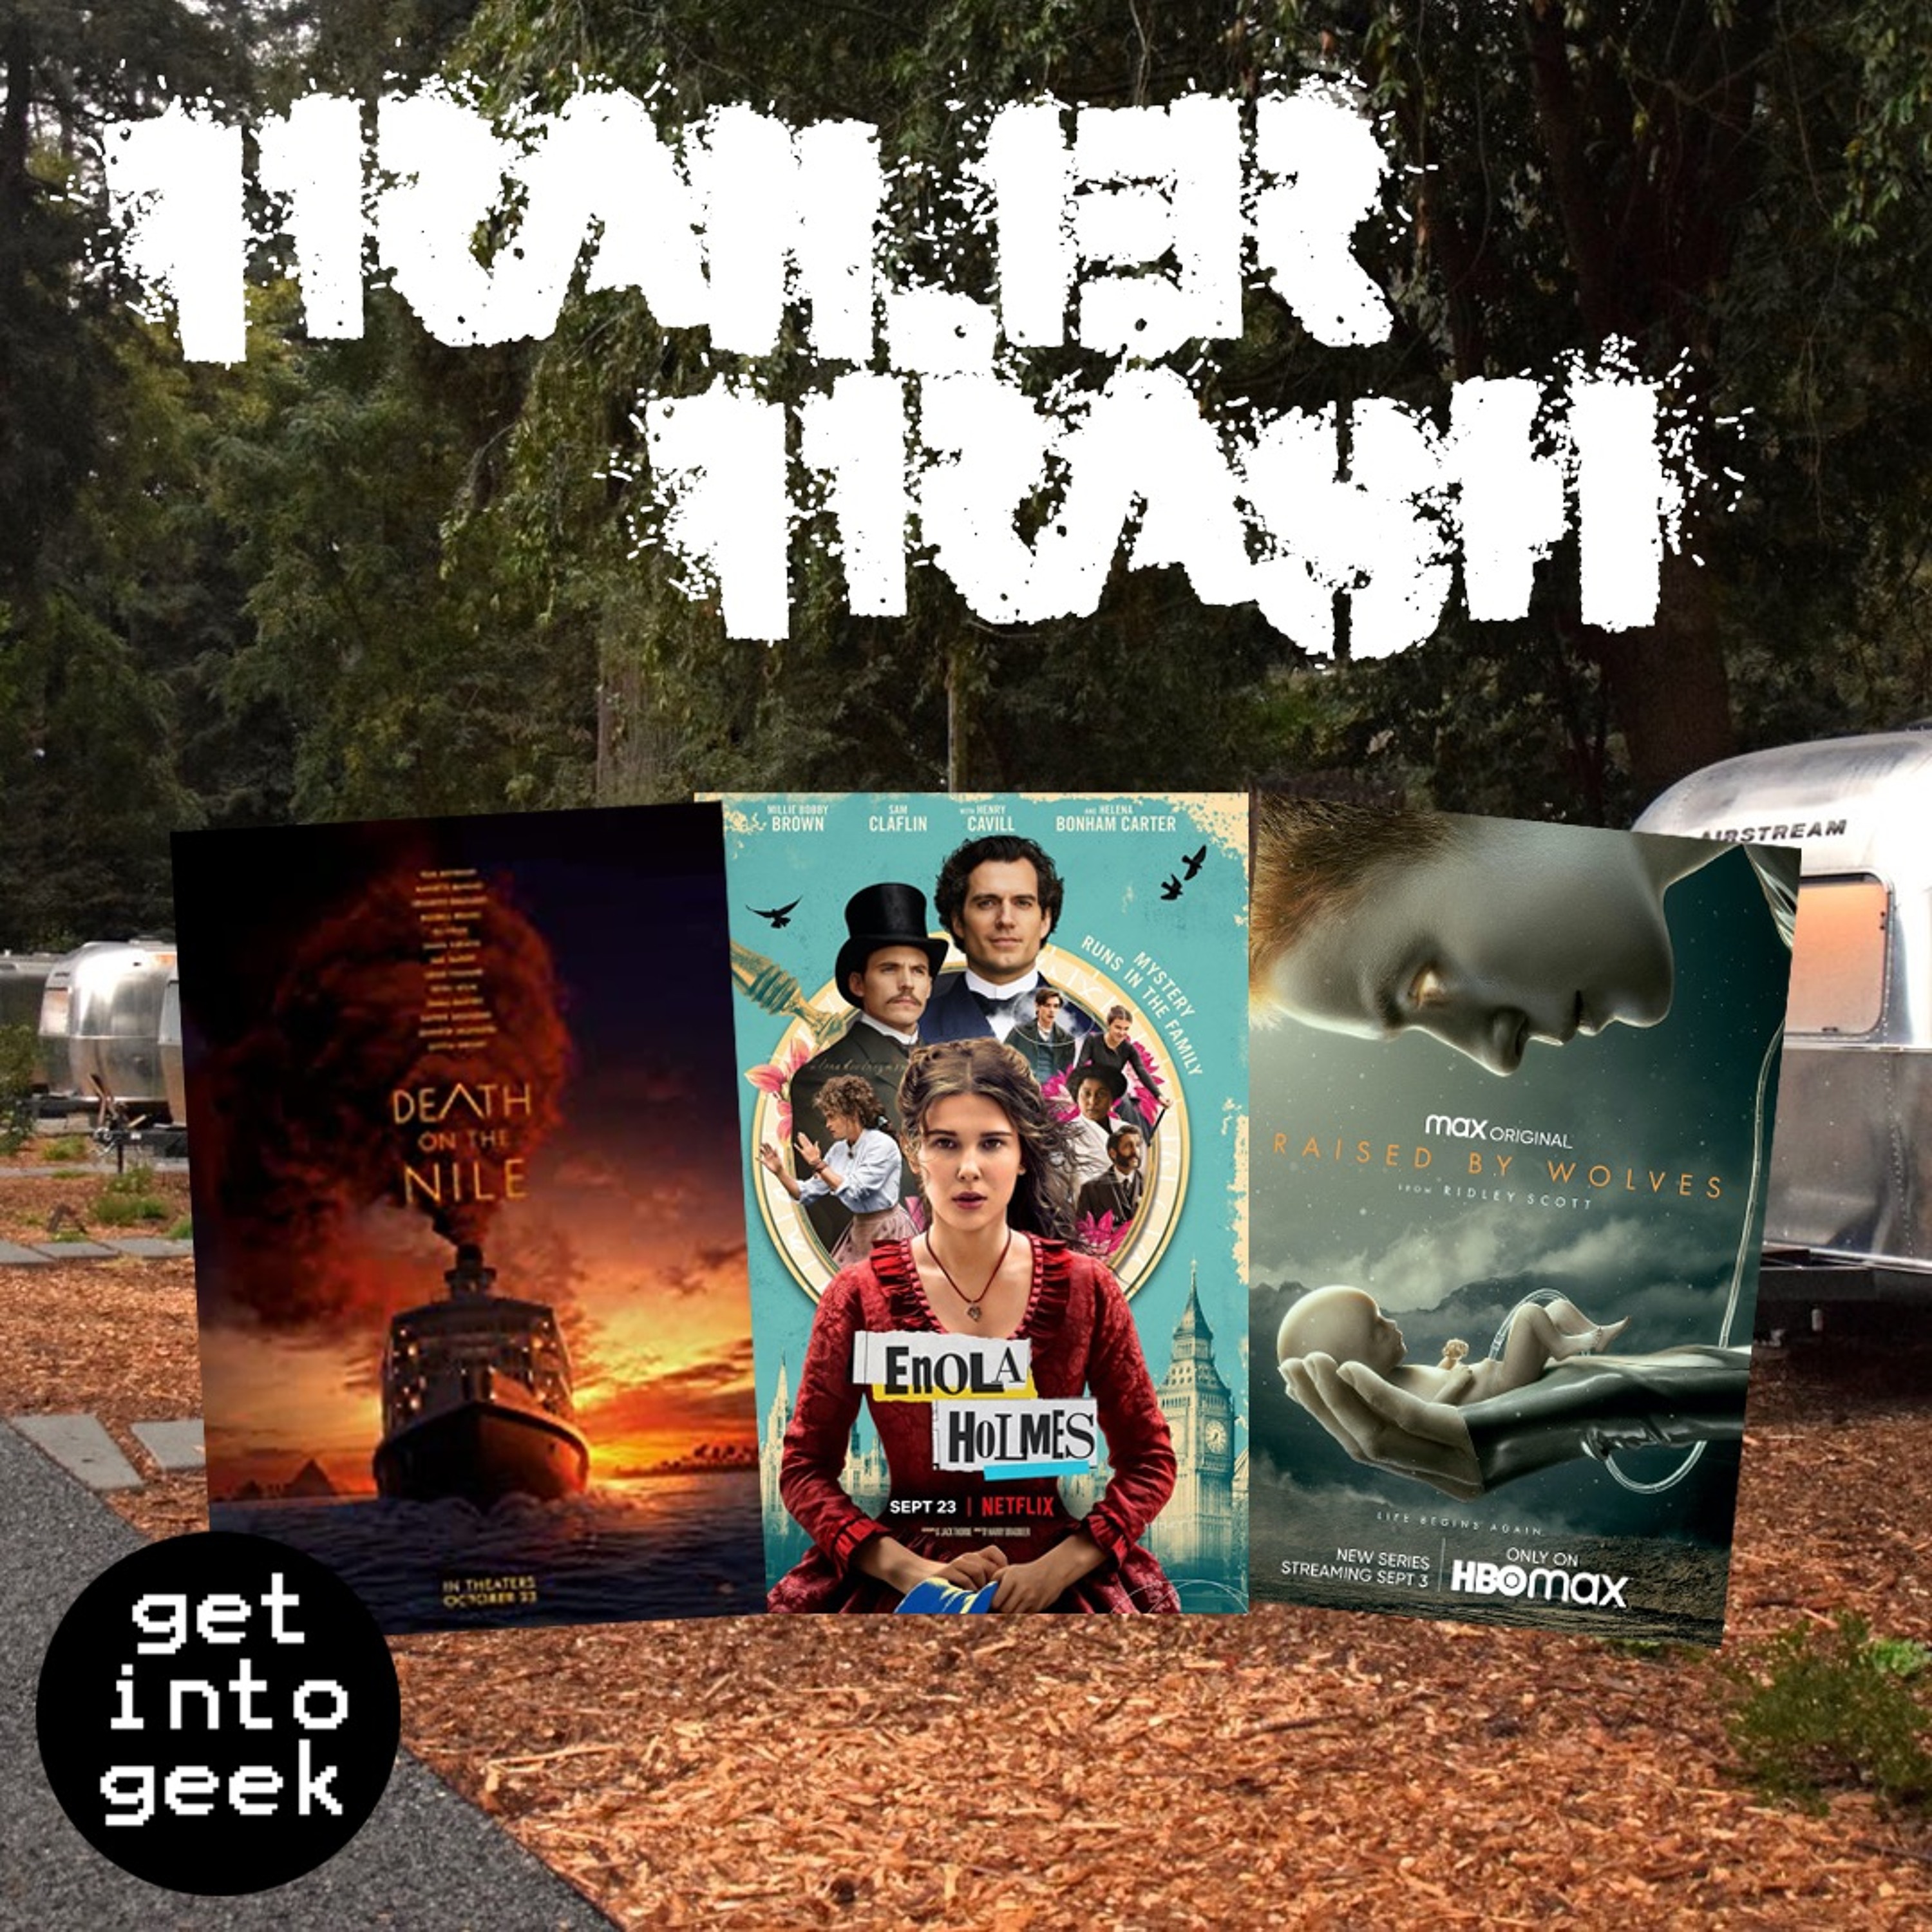 Trailer Trash Ep. 9: Death On The Nile, Elona Holmes & Raised By Wolves